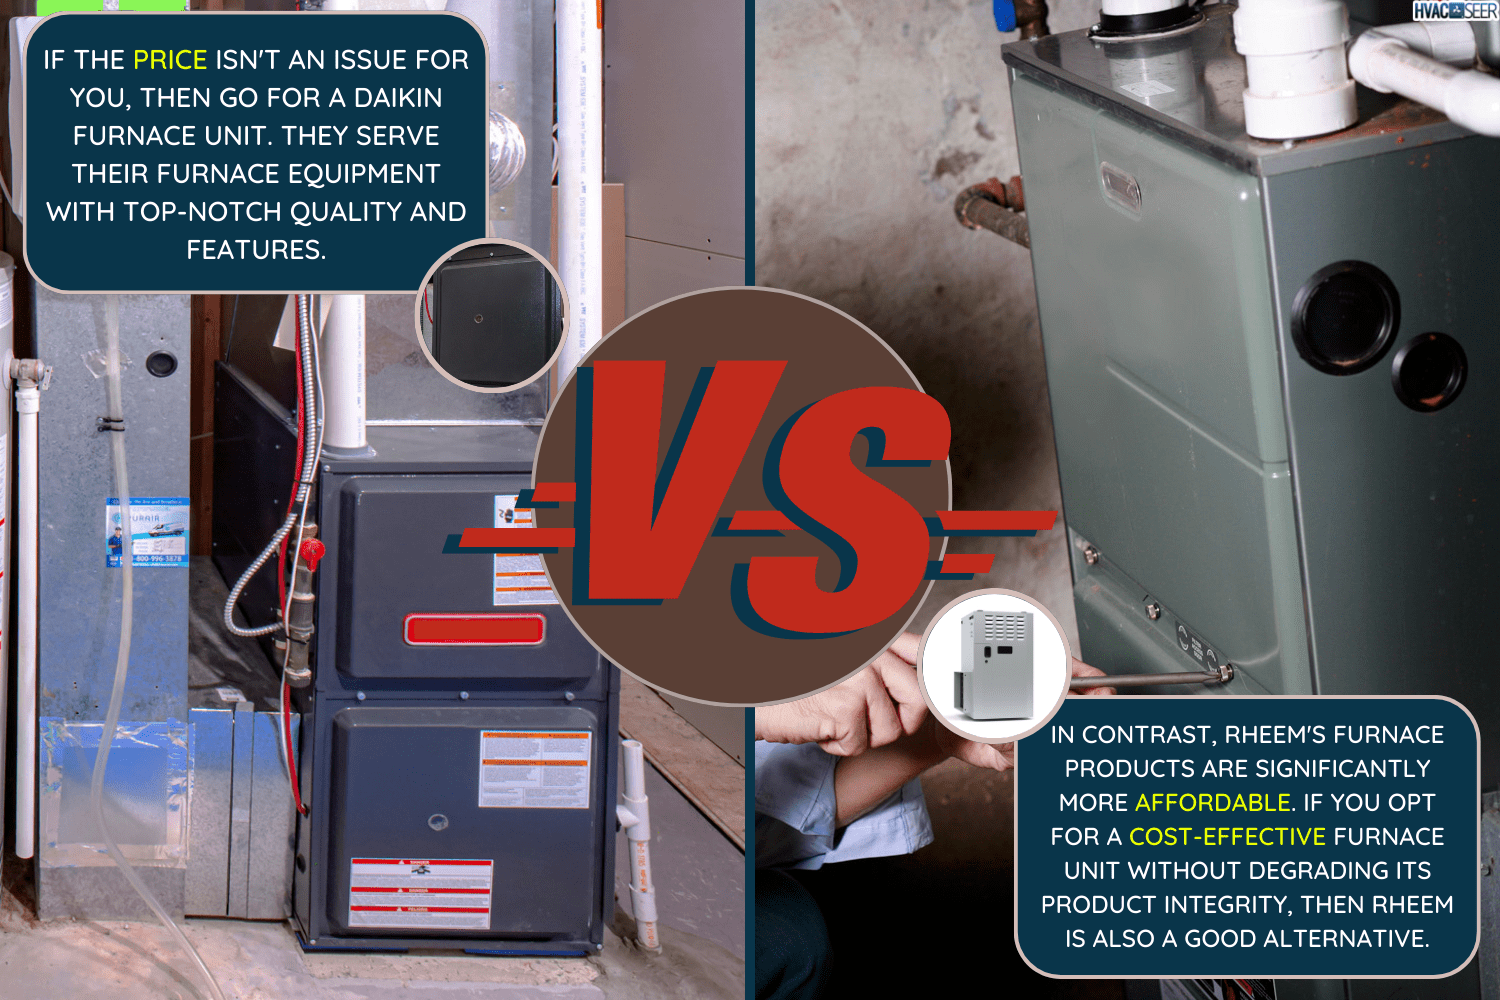 A person changing an clean air filter on a high efficiency furnace - daikin furnace and rheem furnace - Daikin Vs. Rheem Furnace Which Brand To Choose